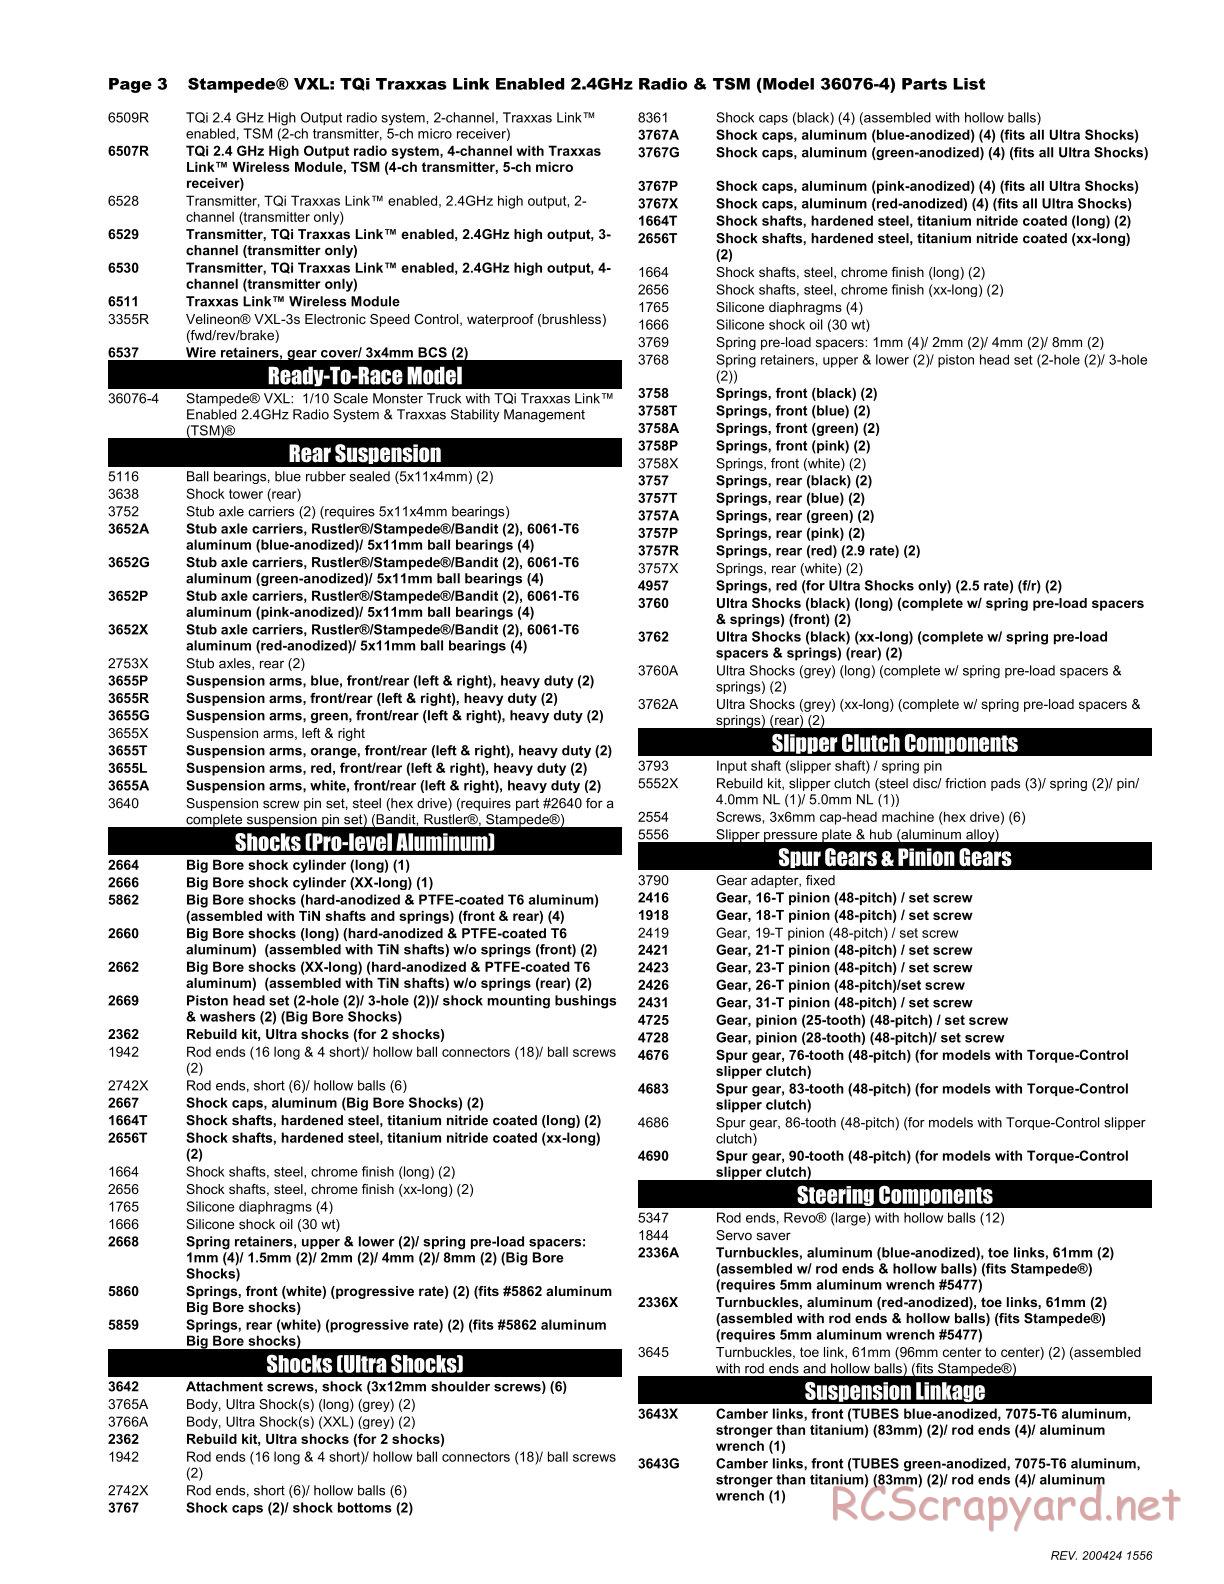 Traxxas - Stampede VXL TSM Rock n' Roll (2017) - Parts List - Page 3